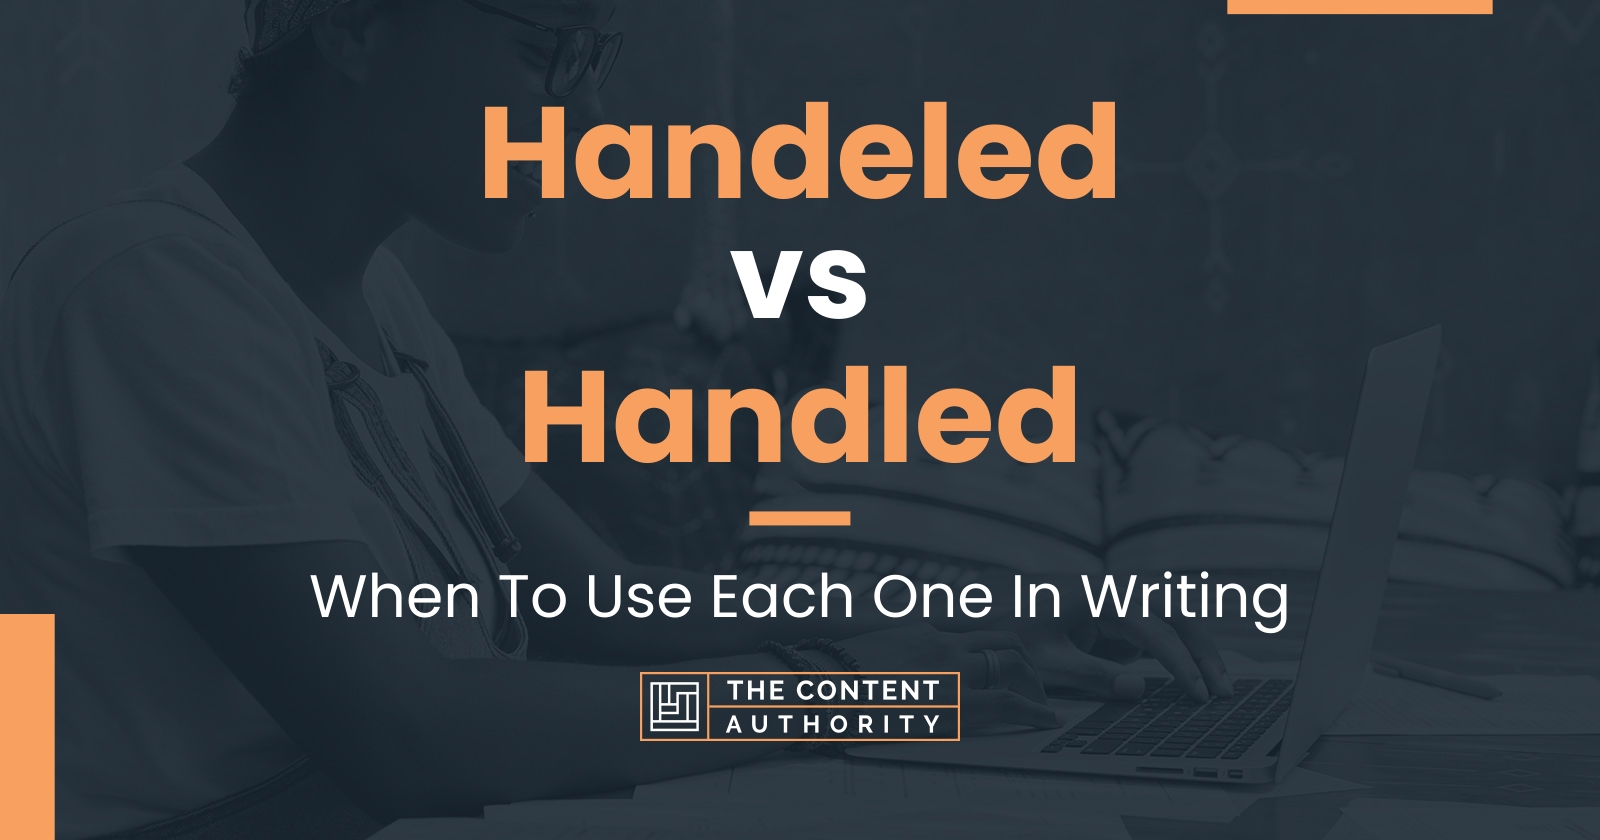 Handeled vs Handled: When To Use Each One In Writing